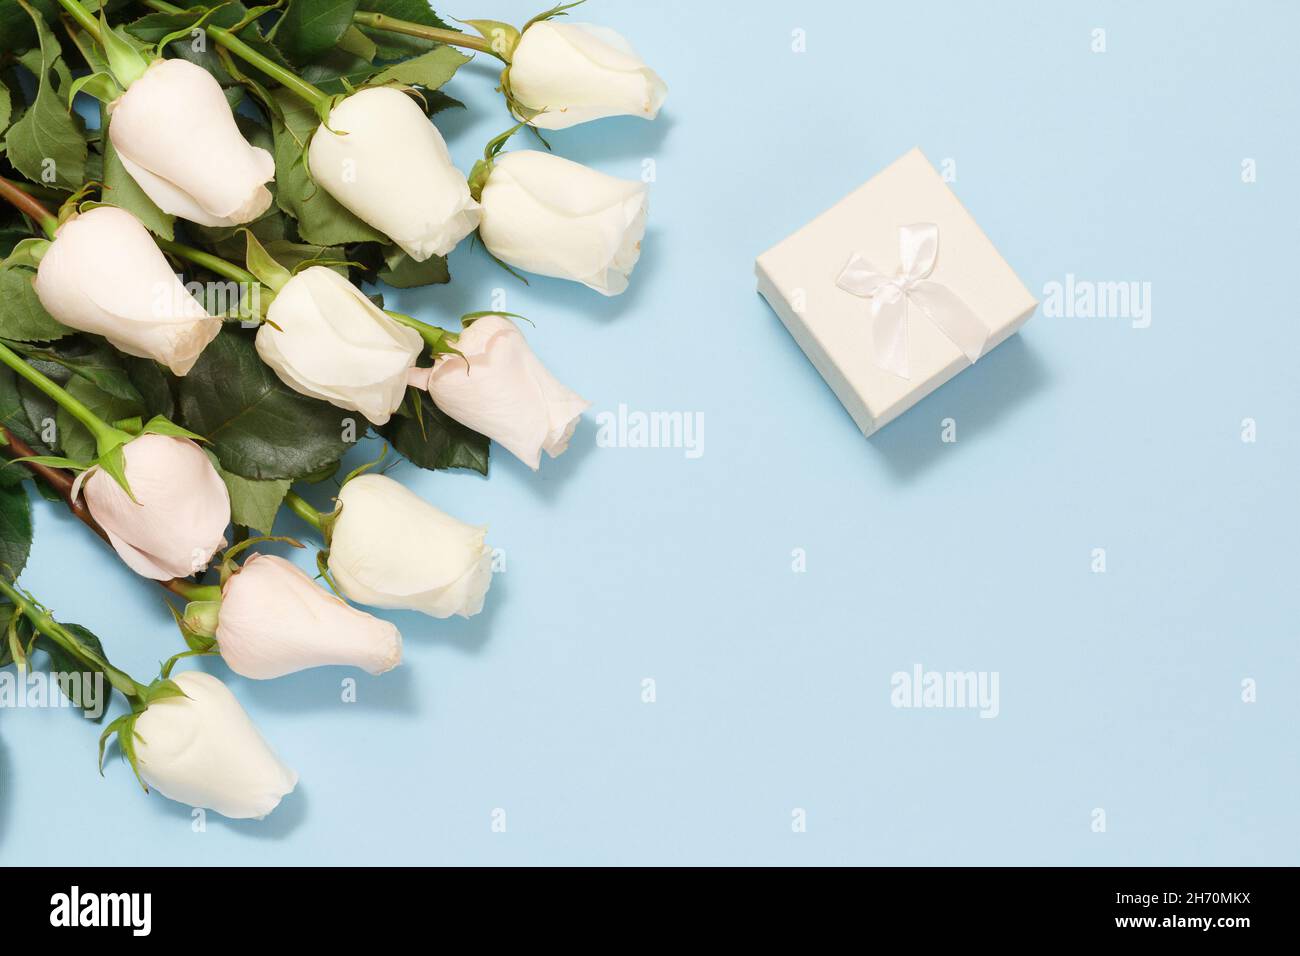 Gift box with beautiful white roses on the blue background. Concept of giving a gift on holidays. Top view. Stock Photo